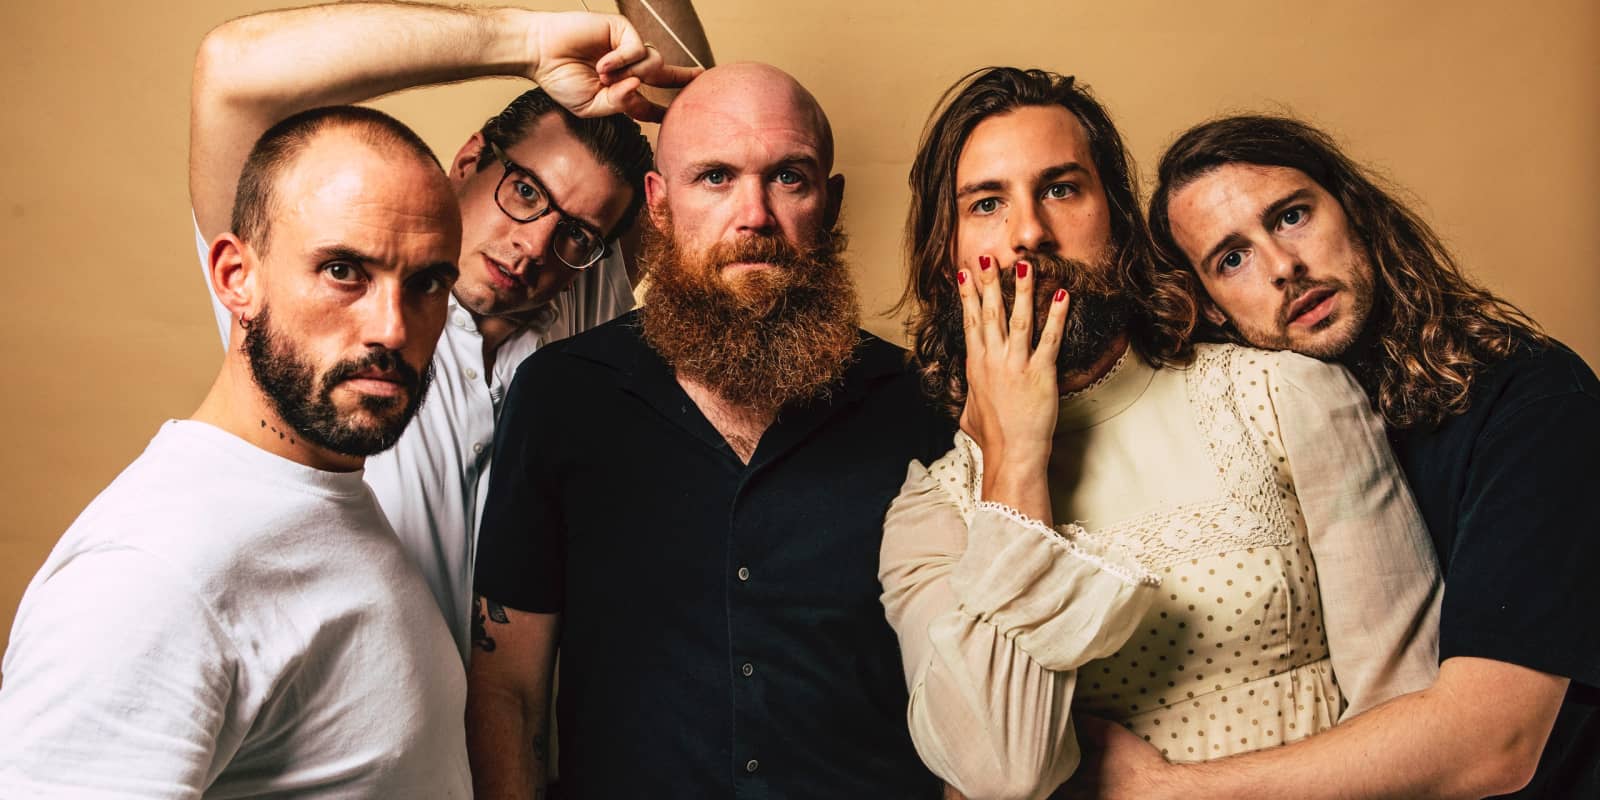 Idles at The Piece Hall Halifax Tickets